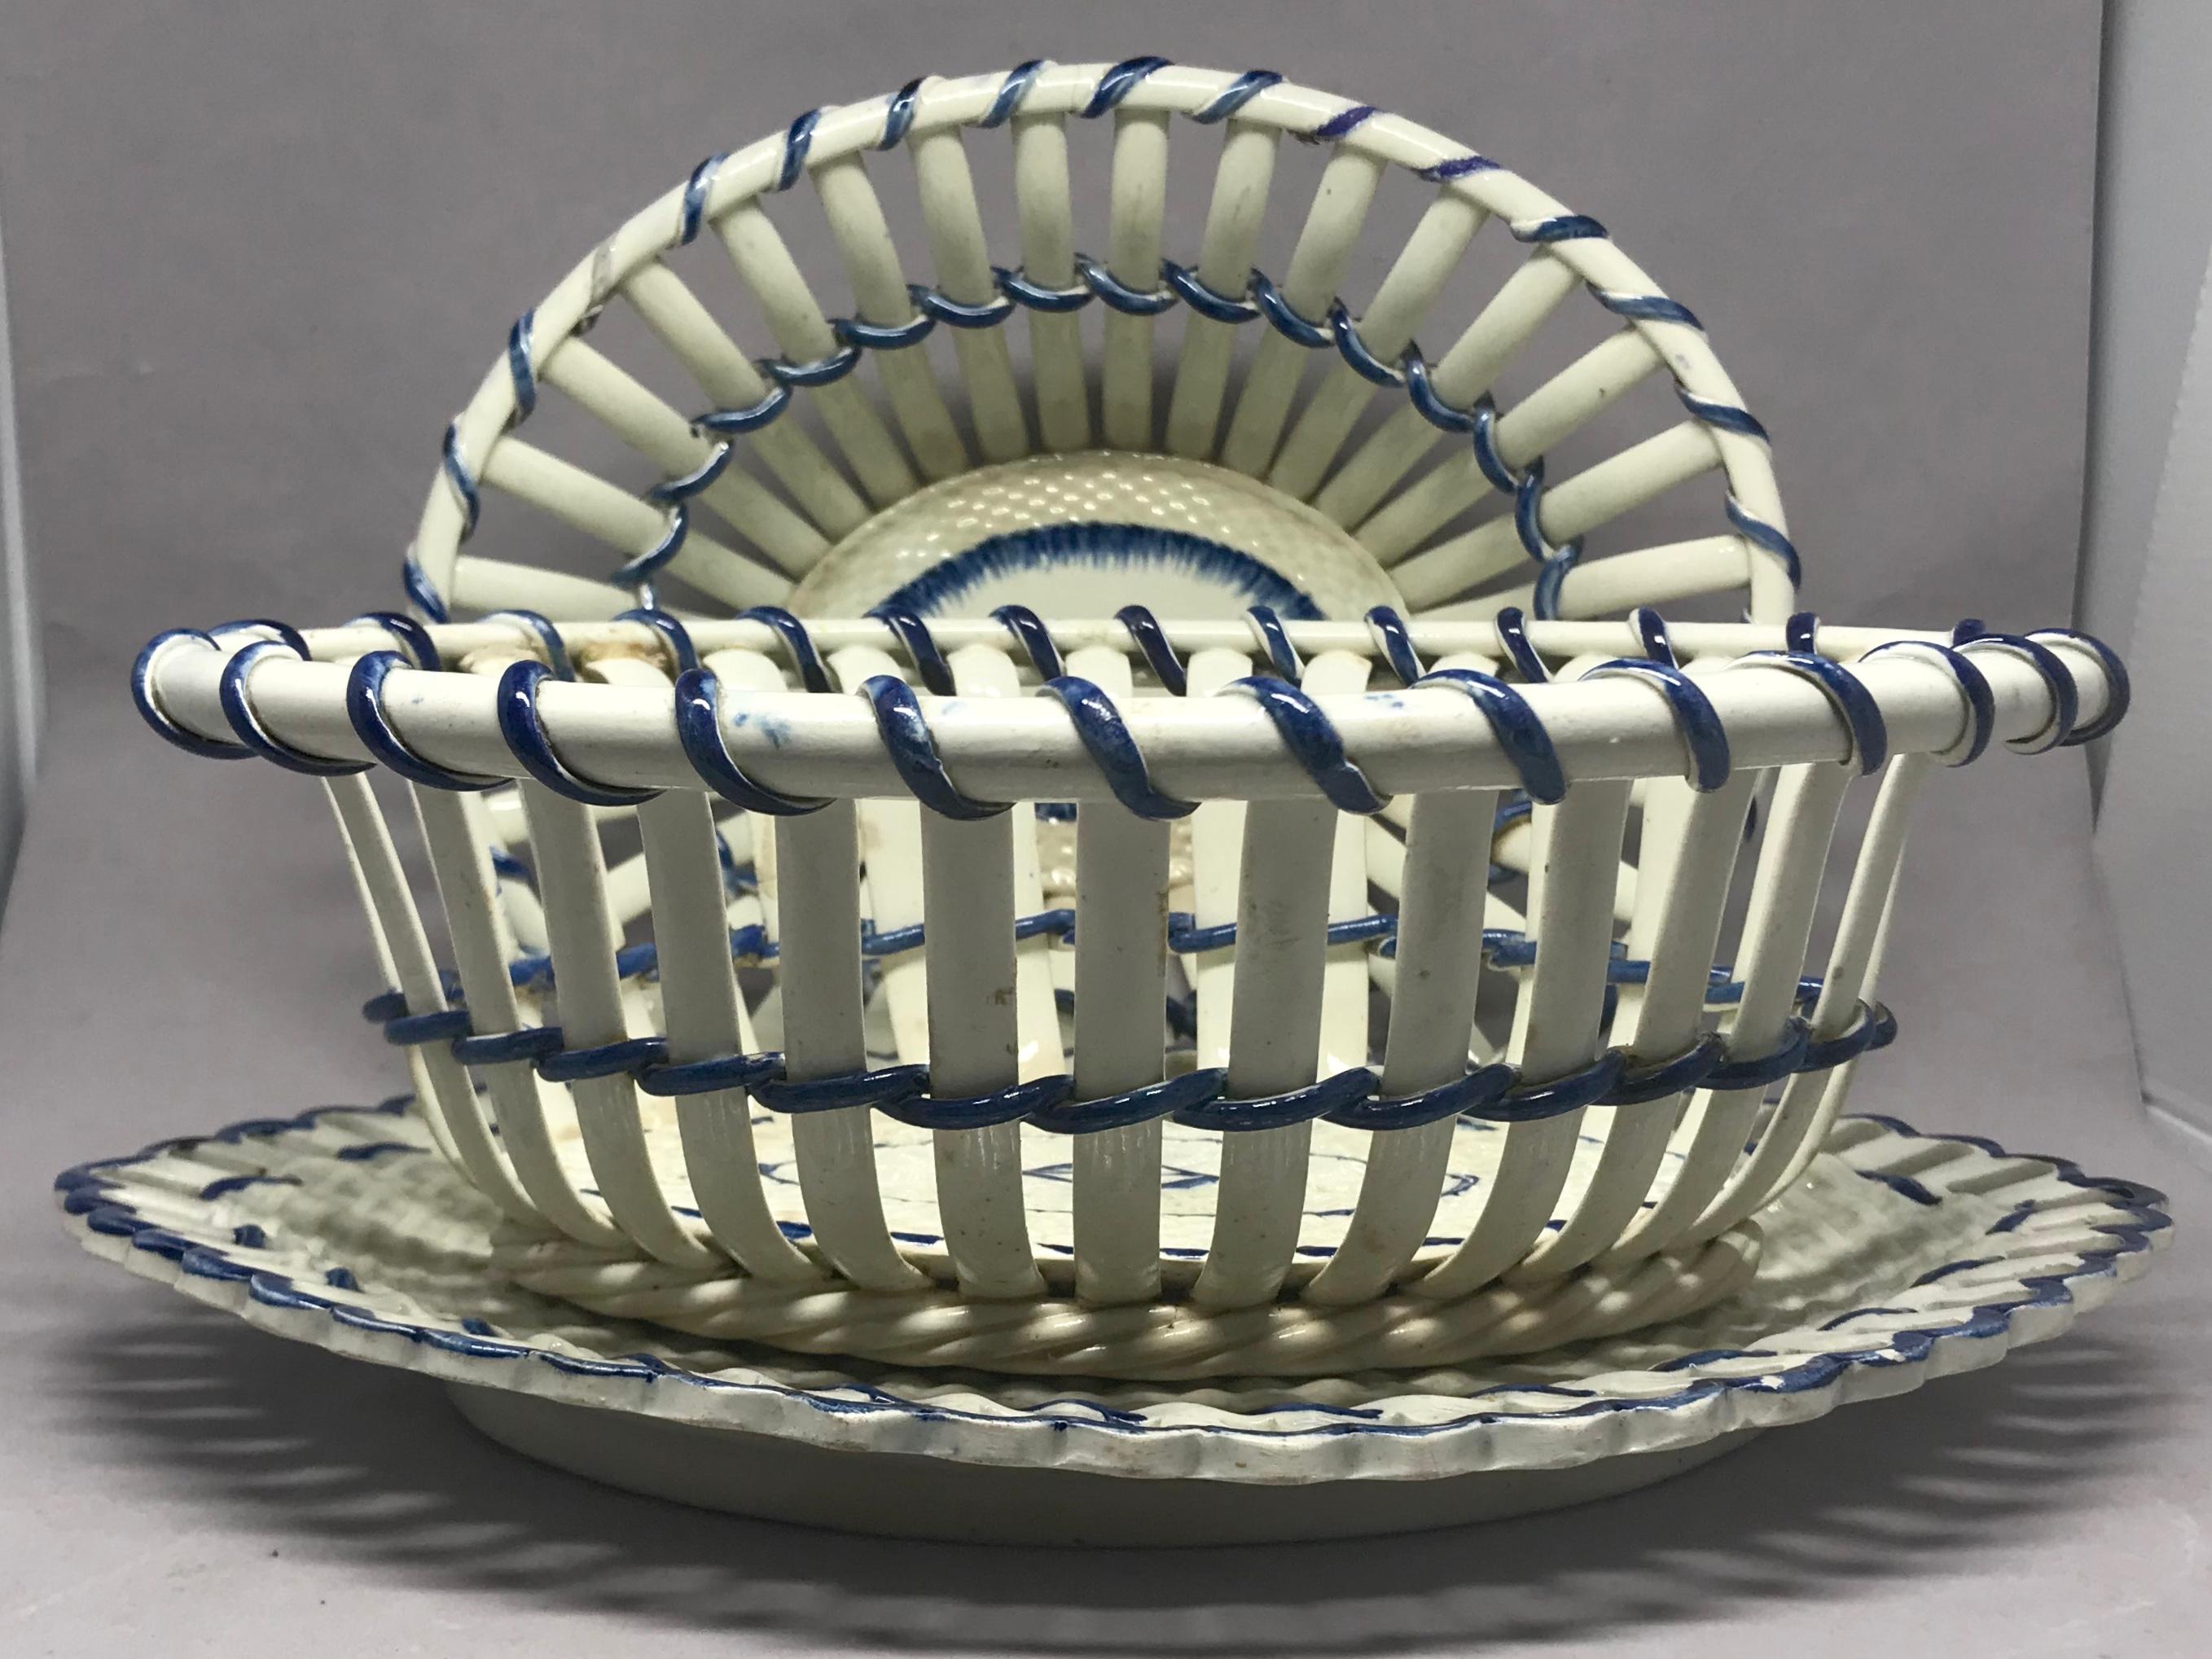 Set of three Leedsware lattice baskets and underplate. Cobalt blue trimmed cream colored basketweave patterned pottery tray with reticulated border and stamped I-H for J.Heath, Hanley 9 and 10 impressed marks. Good condition with one repair to one